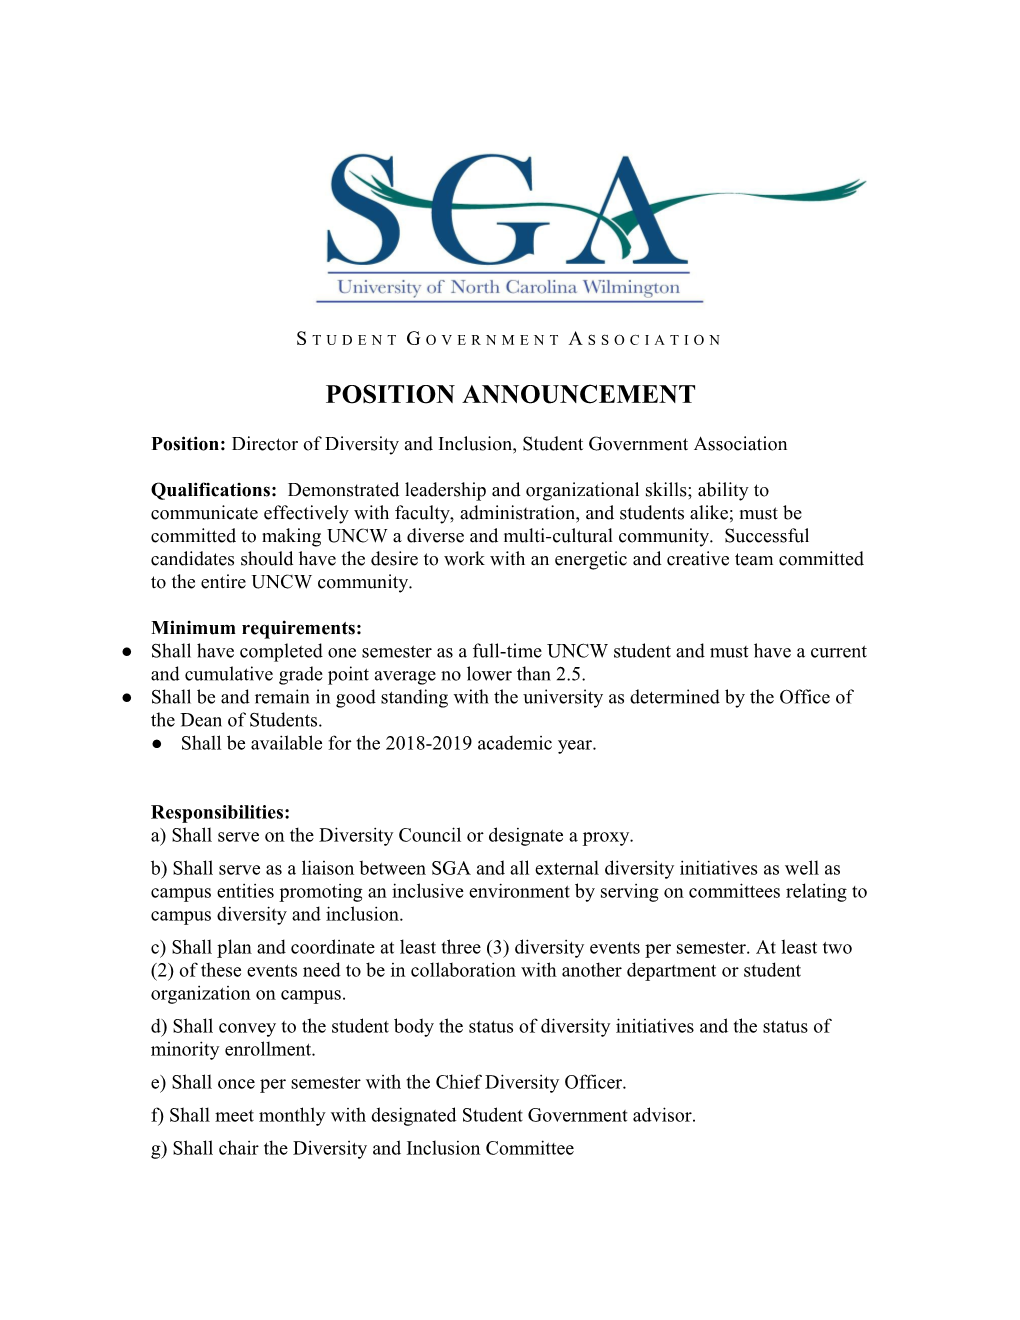 Position: Director of Diversity and Inclusion, Student Government Association